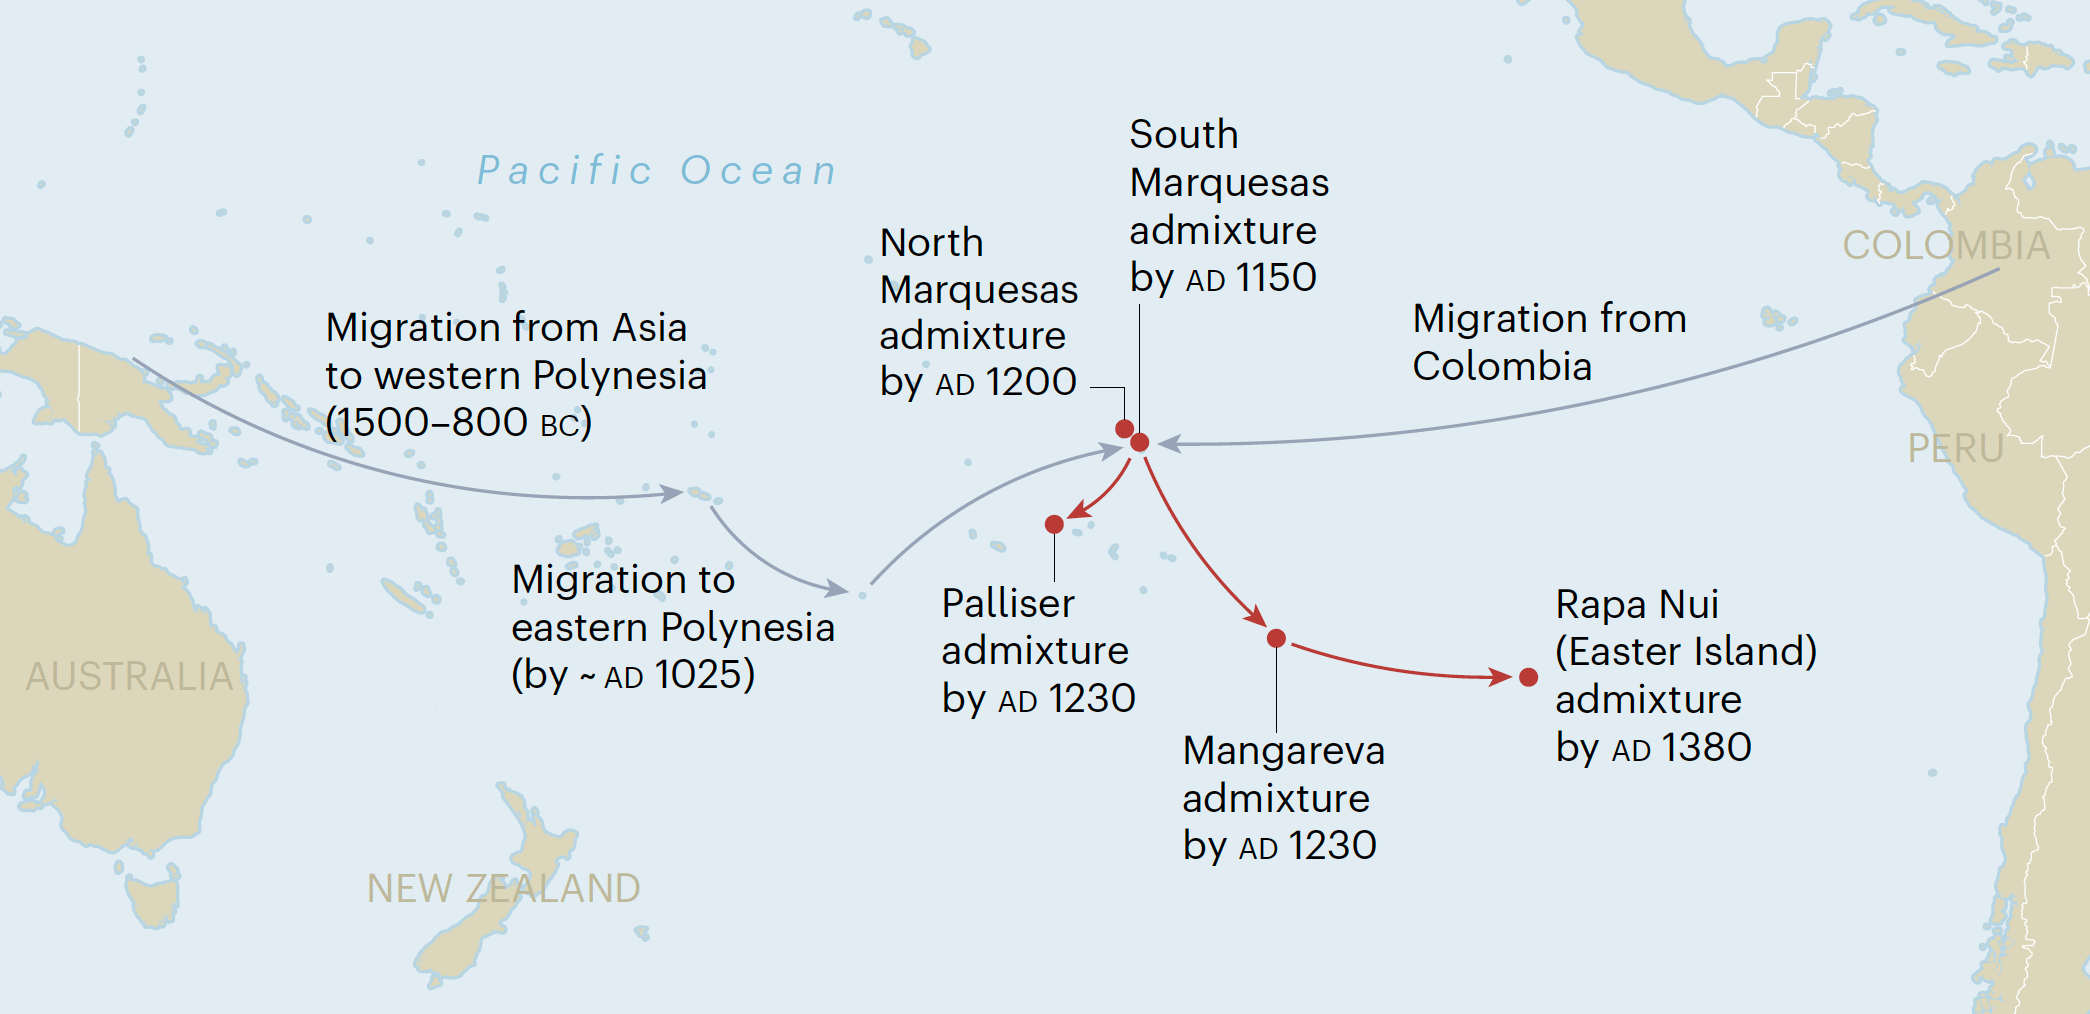 Admixture, or mating events, involving the two populations, as they spread across Polynesia after contact.  (Image: Nature)